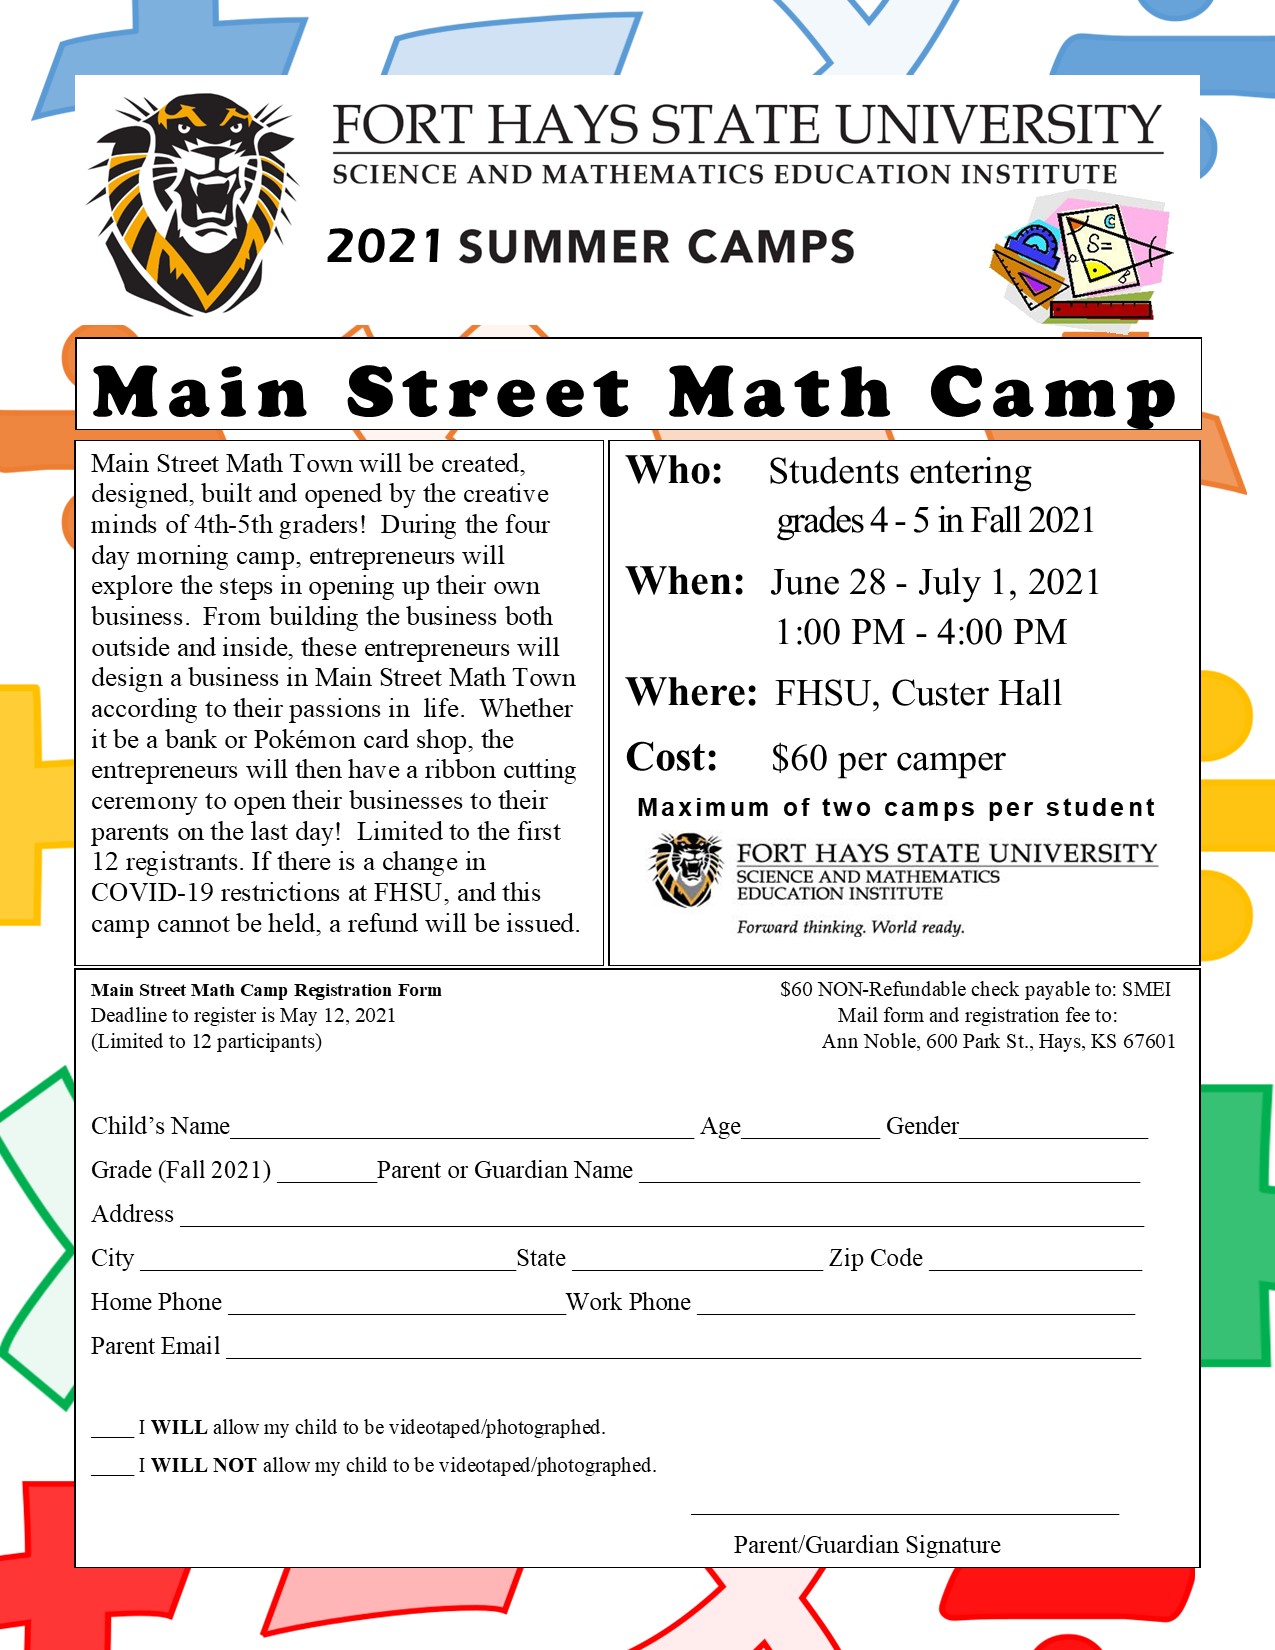 Science and mathematics education institute camps - Fort Hays State